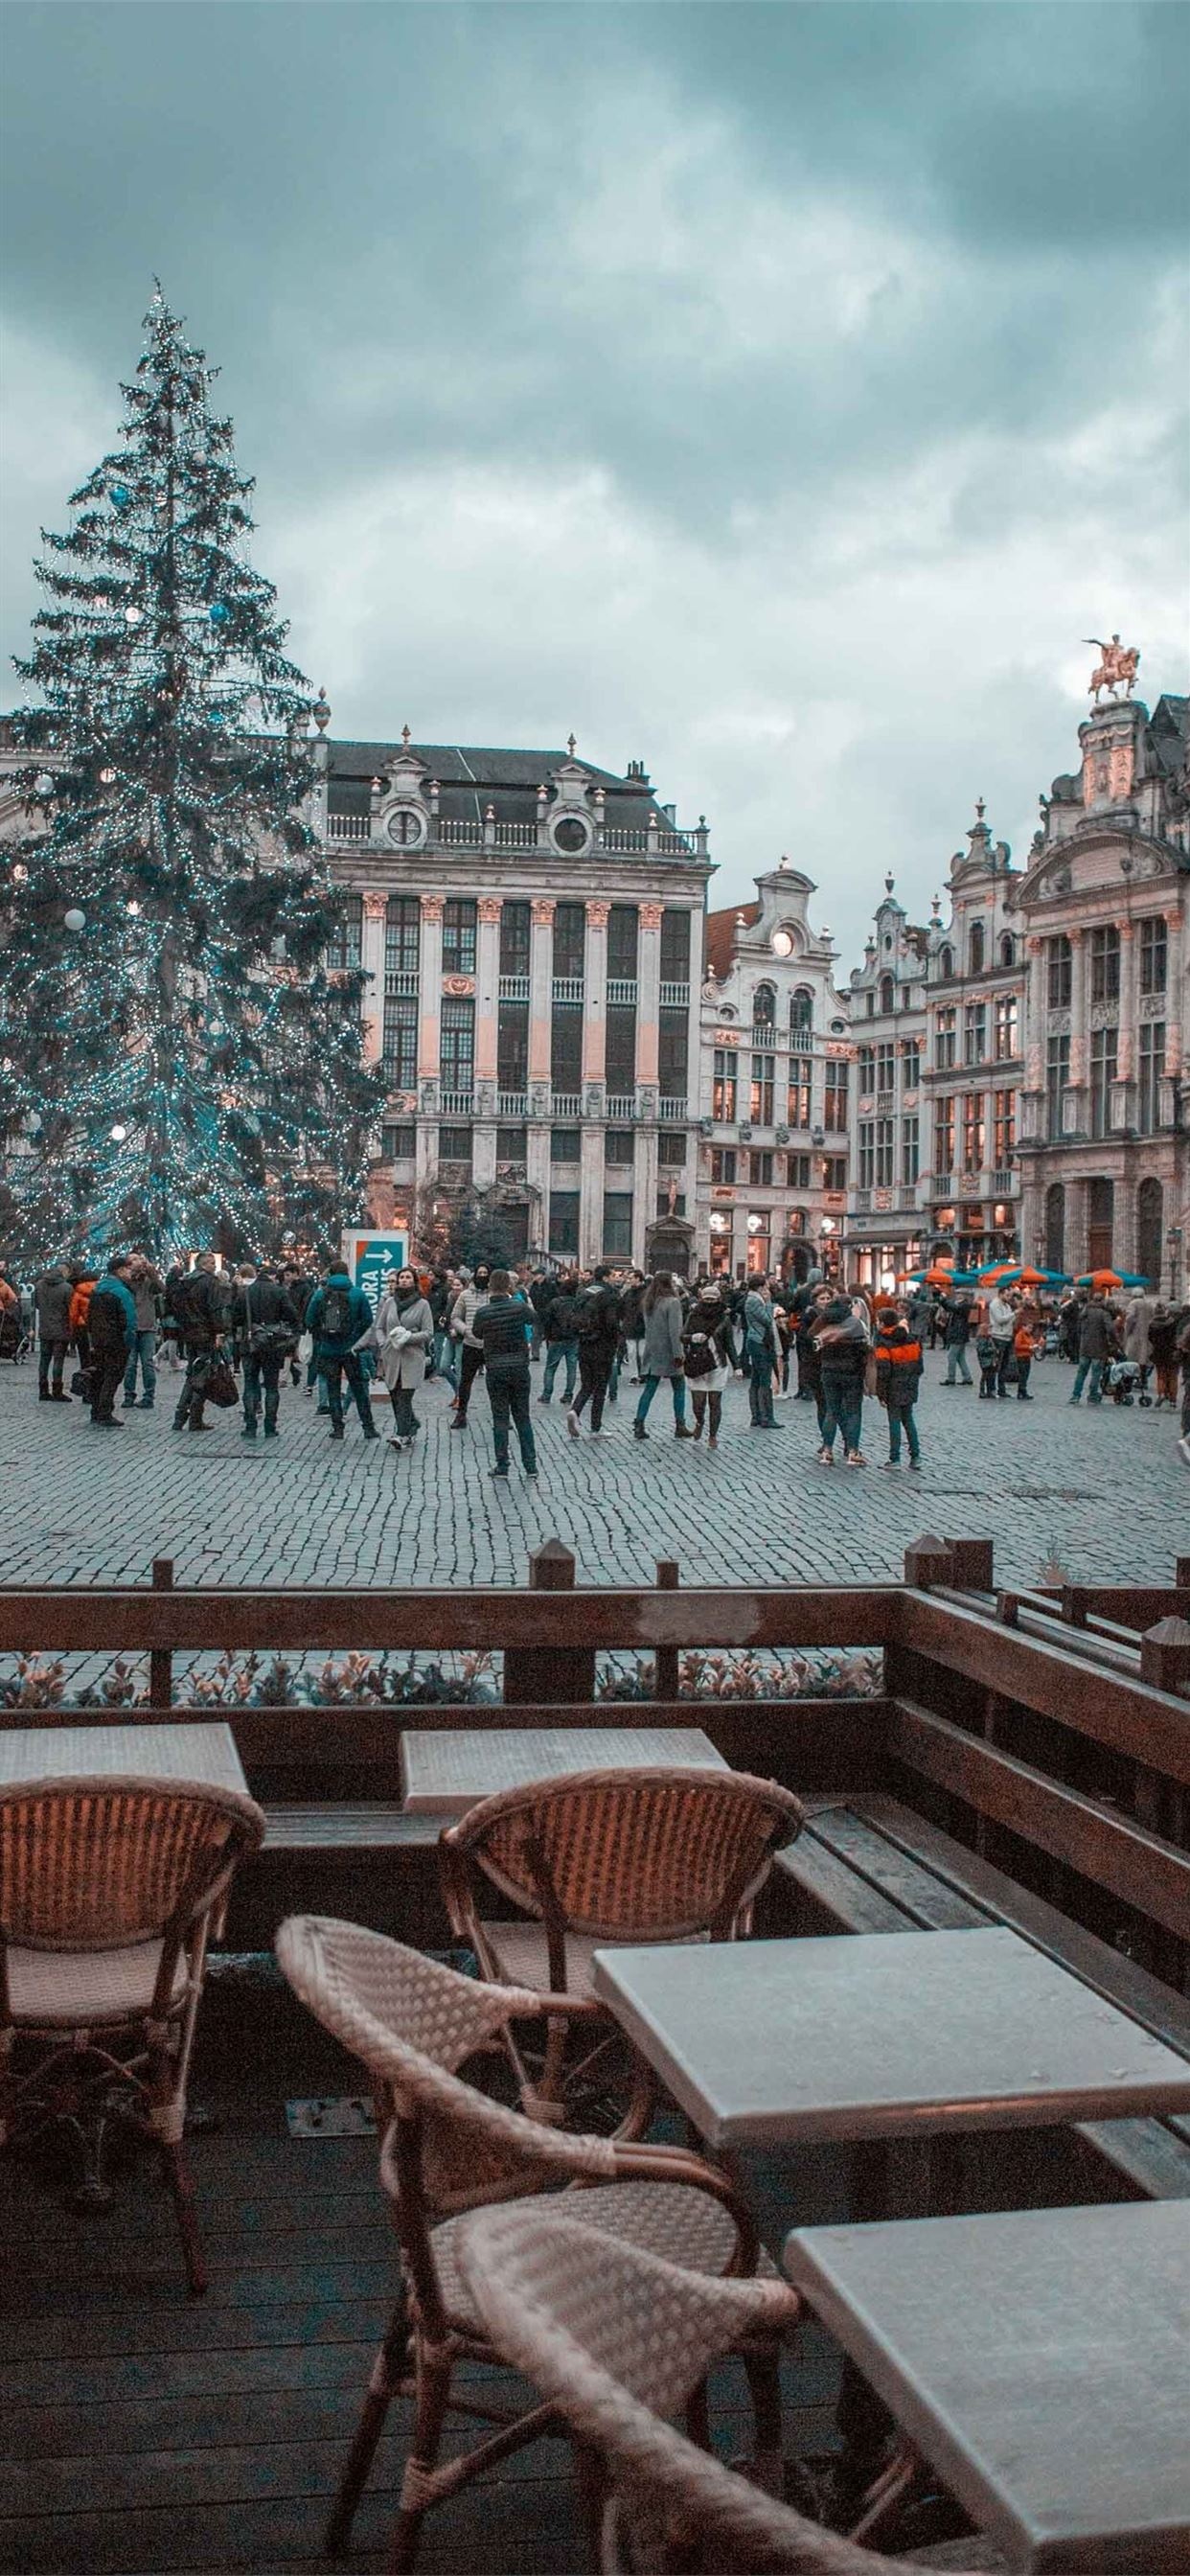 Brussels iPhone wallpapers, HD backgrounds, Free download, Phone personalization, 1250x2690 HD Phone